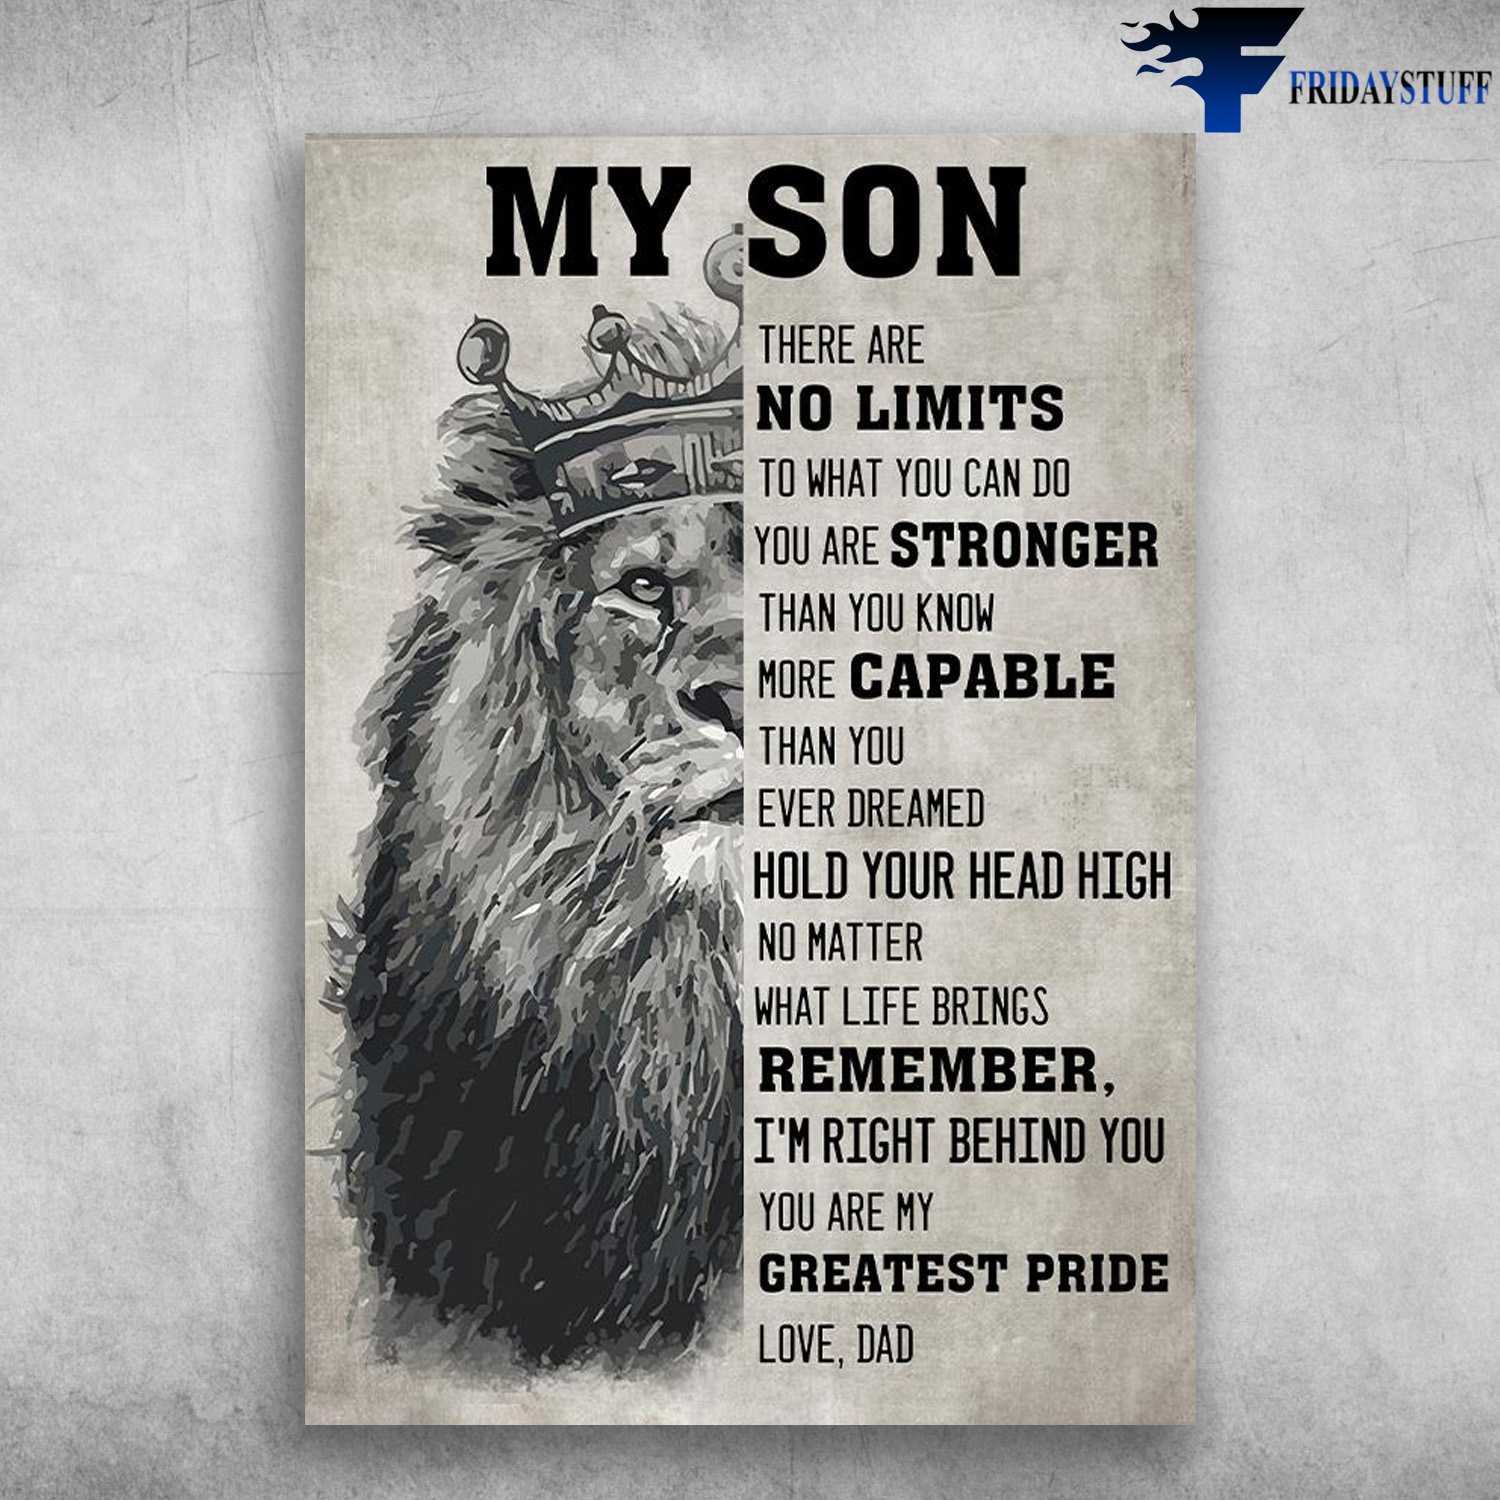 Lion King - My Son, There Are No Limits, To What You Can Do, You Are Stronger, Than You Know, More Capable Than You, Ever Dreamed, Hold Your Head High